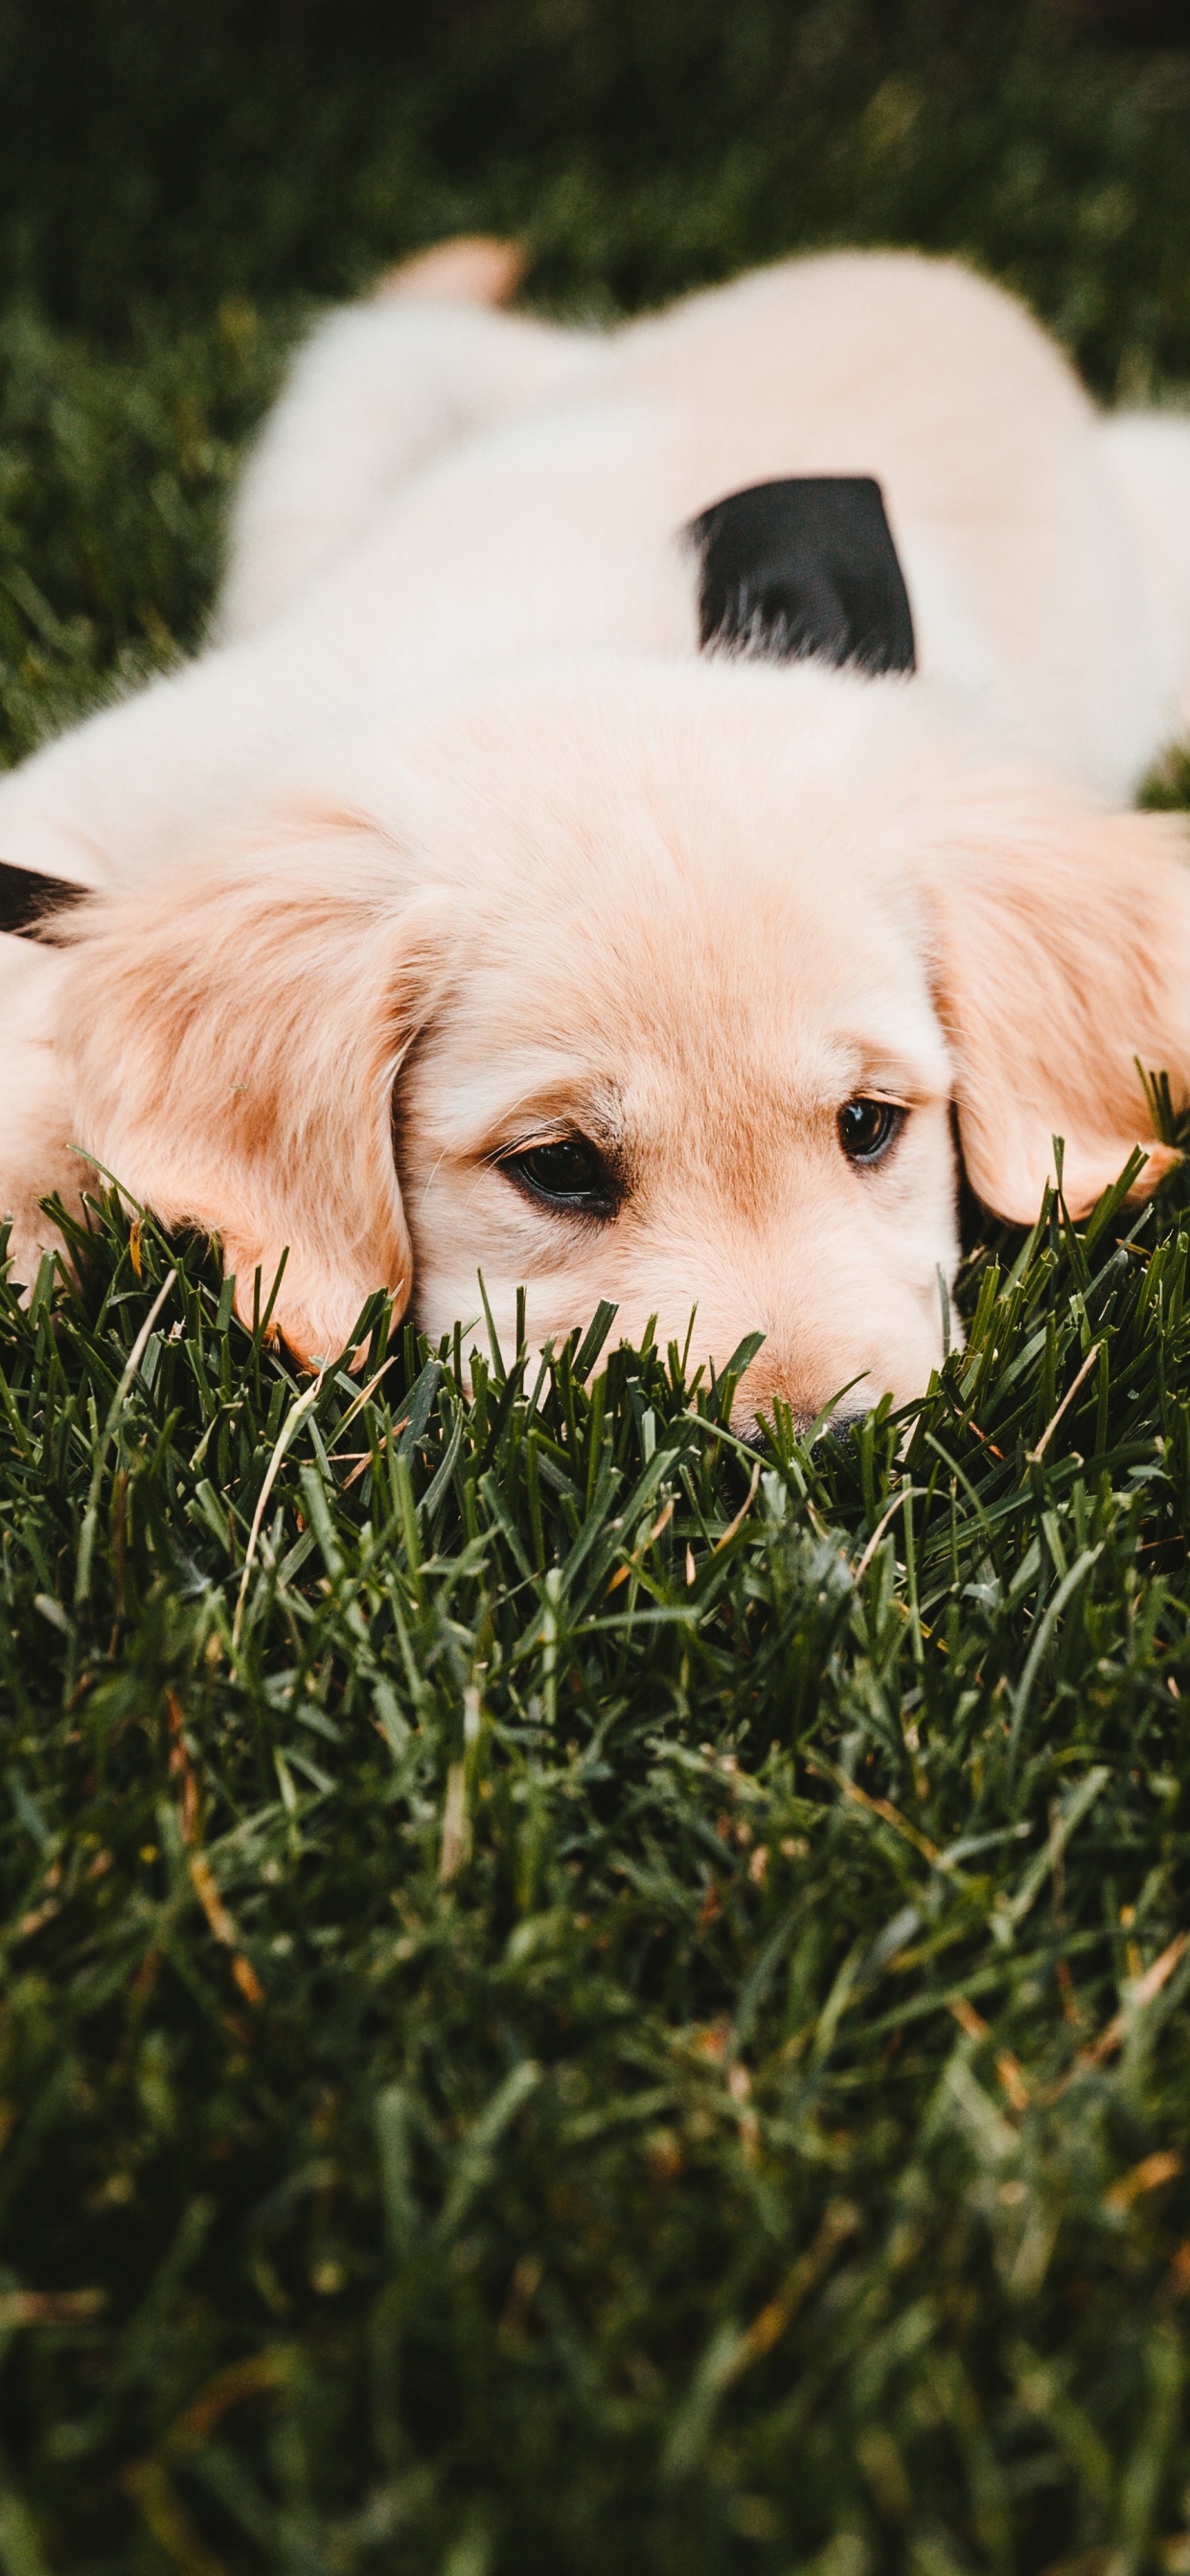 White Short Coated Dog Lying on Green Grass Field During Daytime. Wallpaper in 1242x2688 Resolution